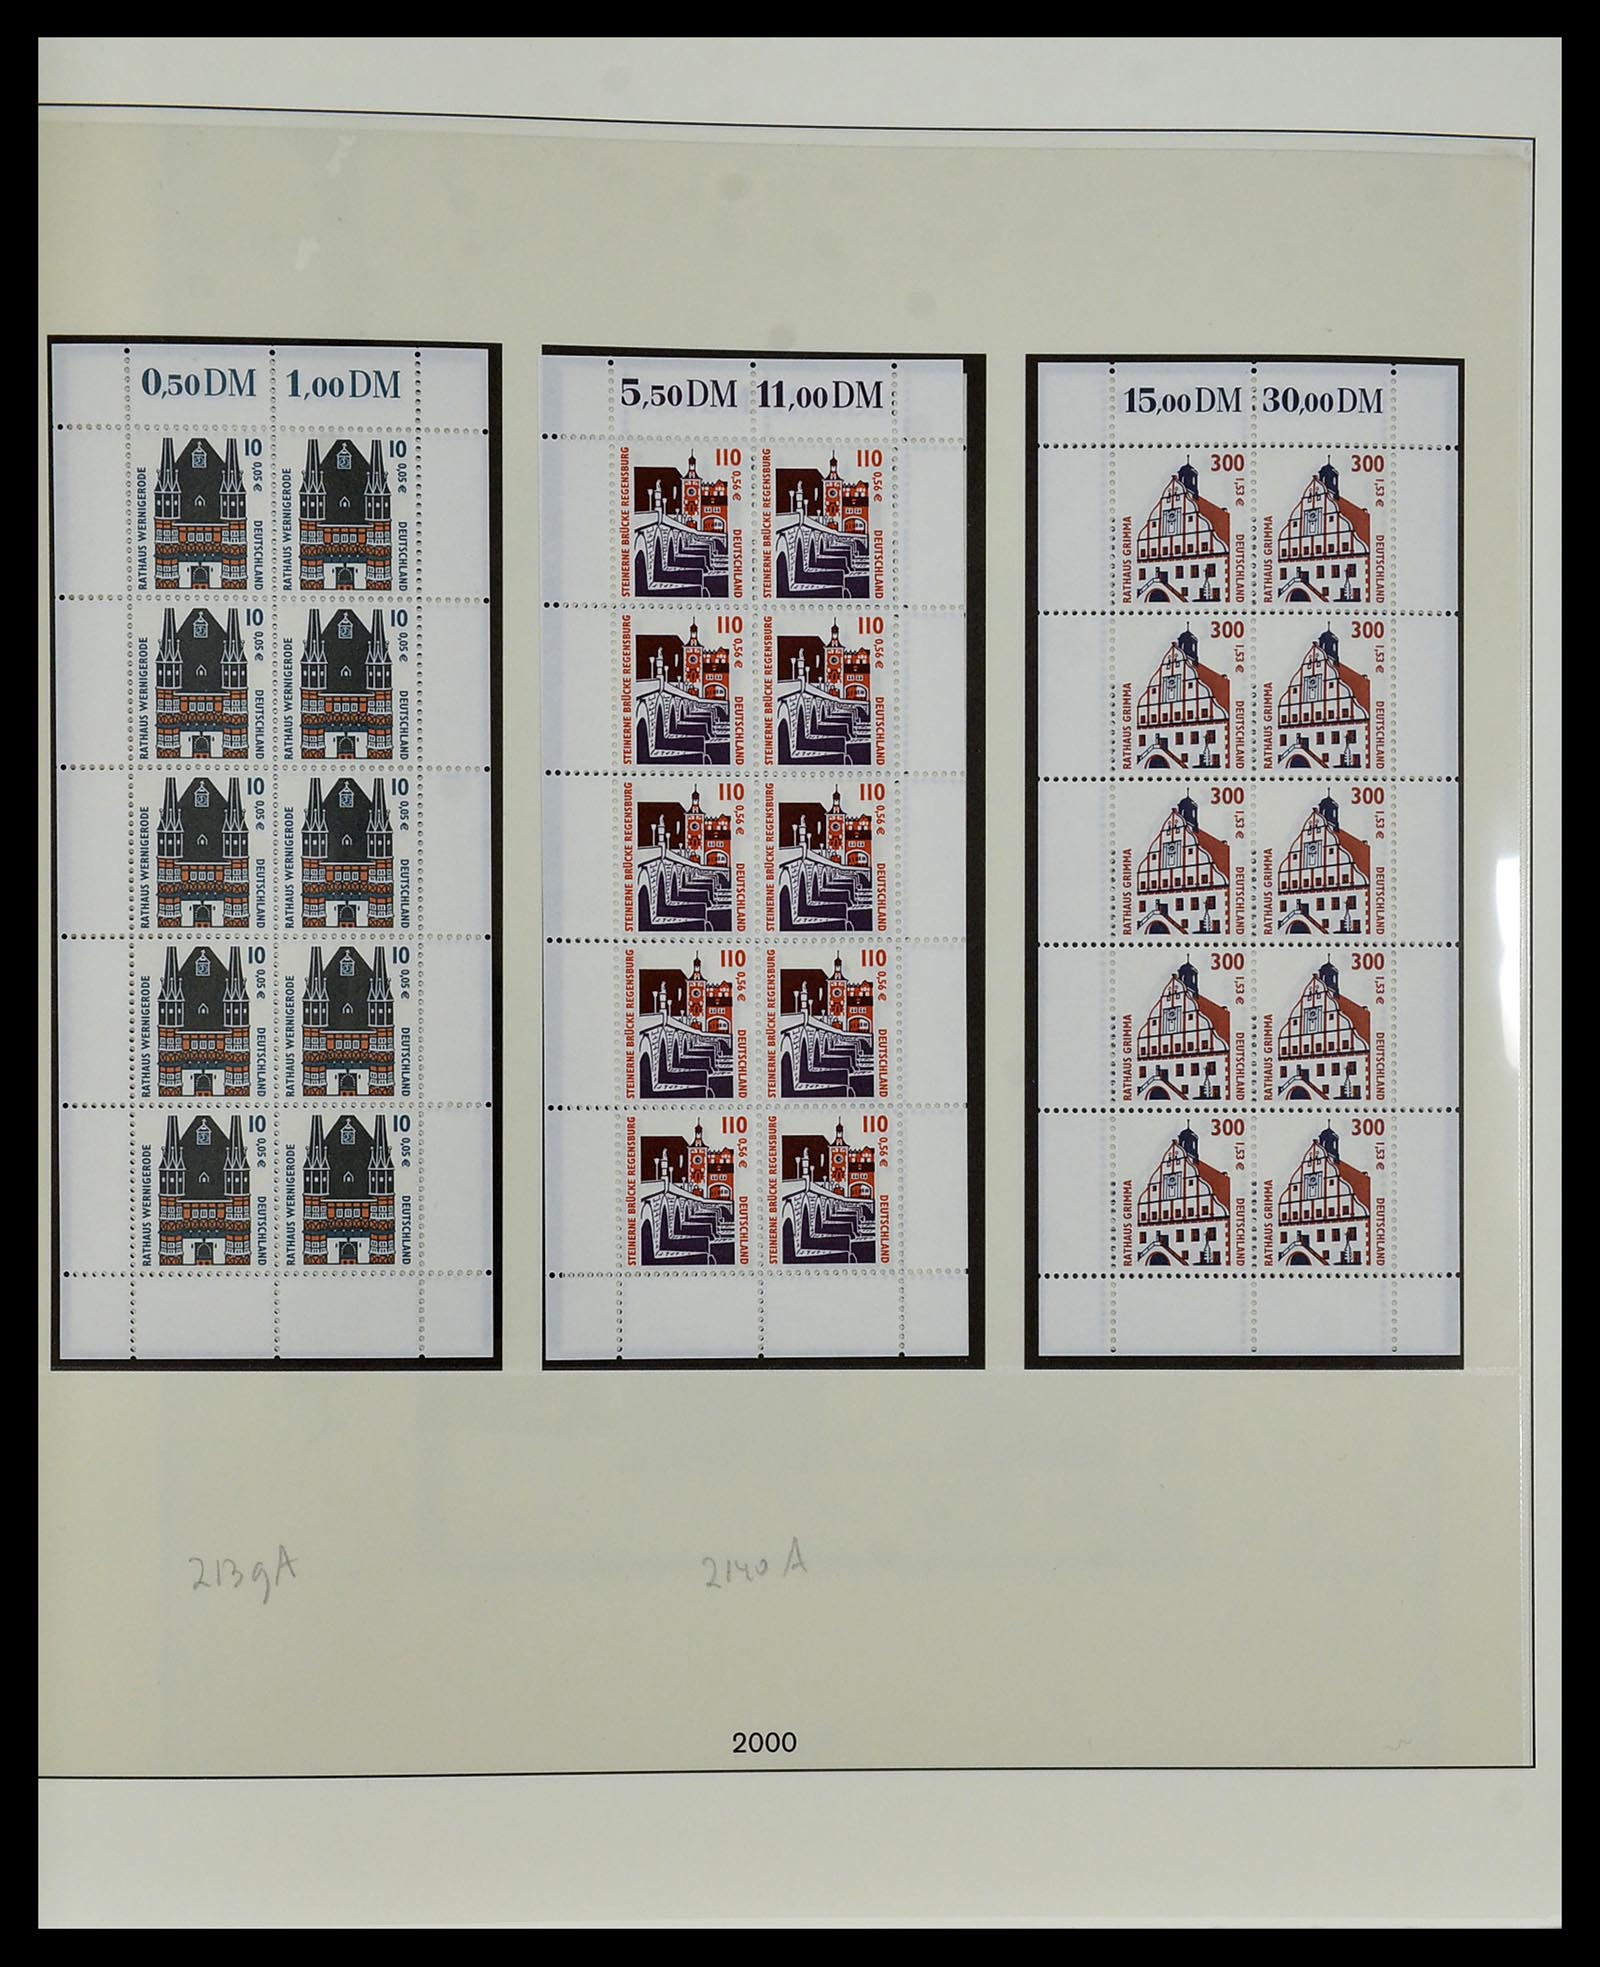 34456 247 - Stamp Collection 34456 Bundespost 1994-2000.